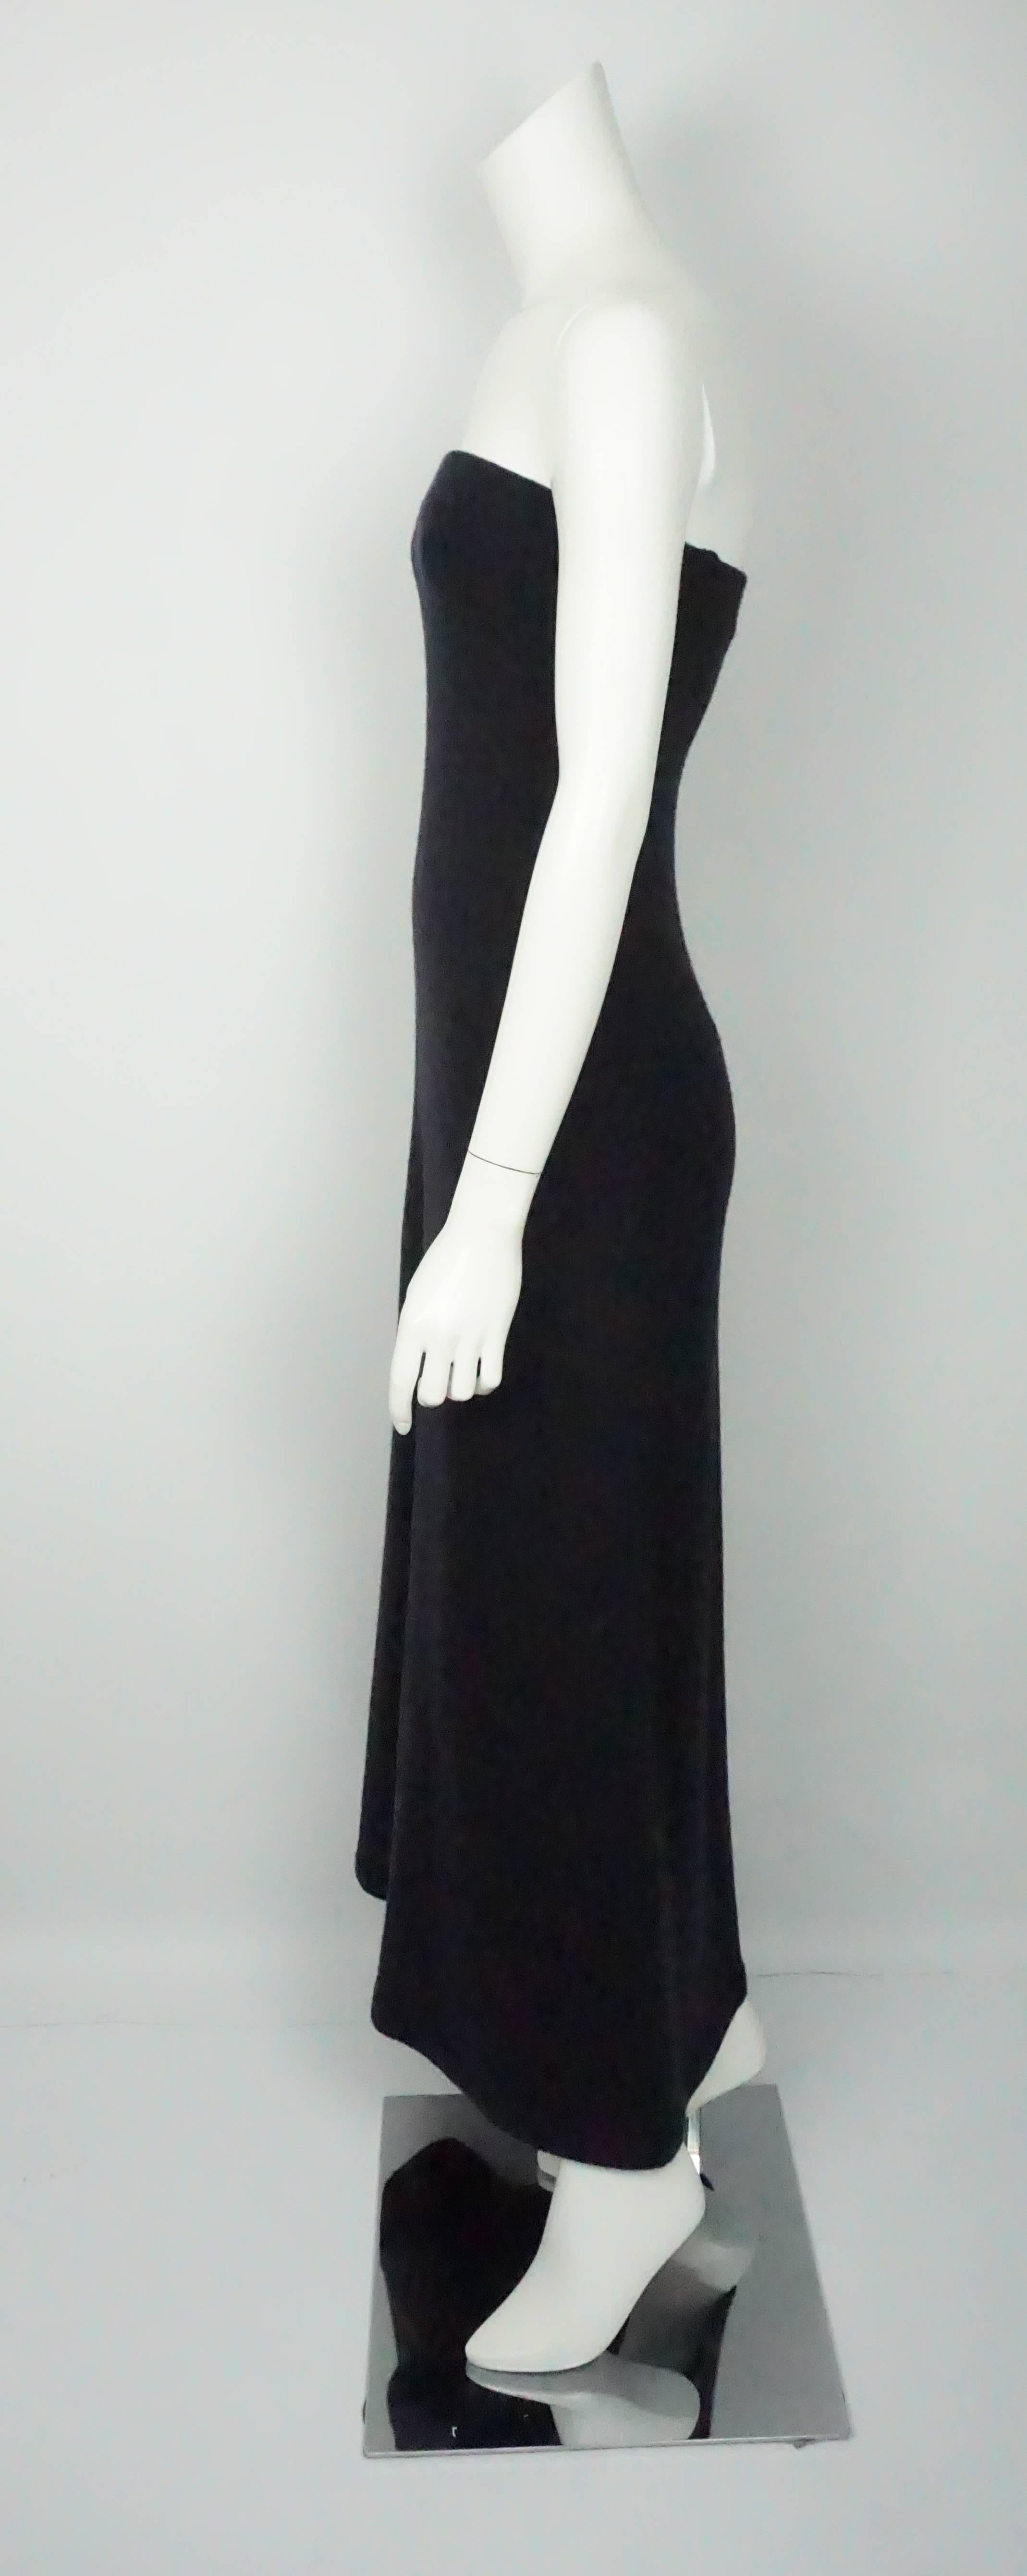 Ralph Lauren BL Navy Cashmere Strapless Maxi Dress - Small  This simple yet elegant dress is in excellent condition. The dress is completely made of cashmere and is lined in silk. There is an elastic band sewn in to the top of the dress and the